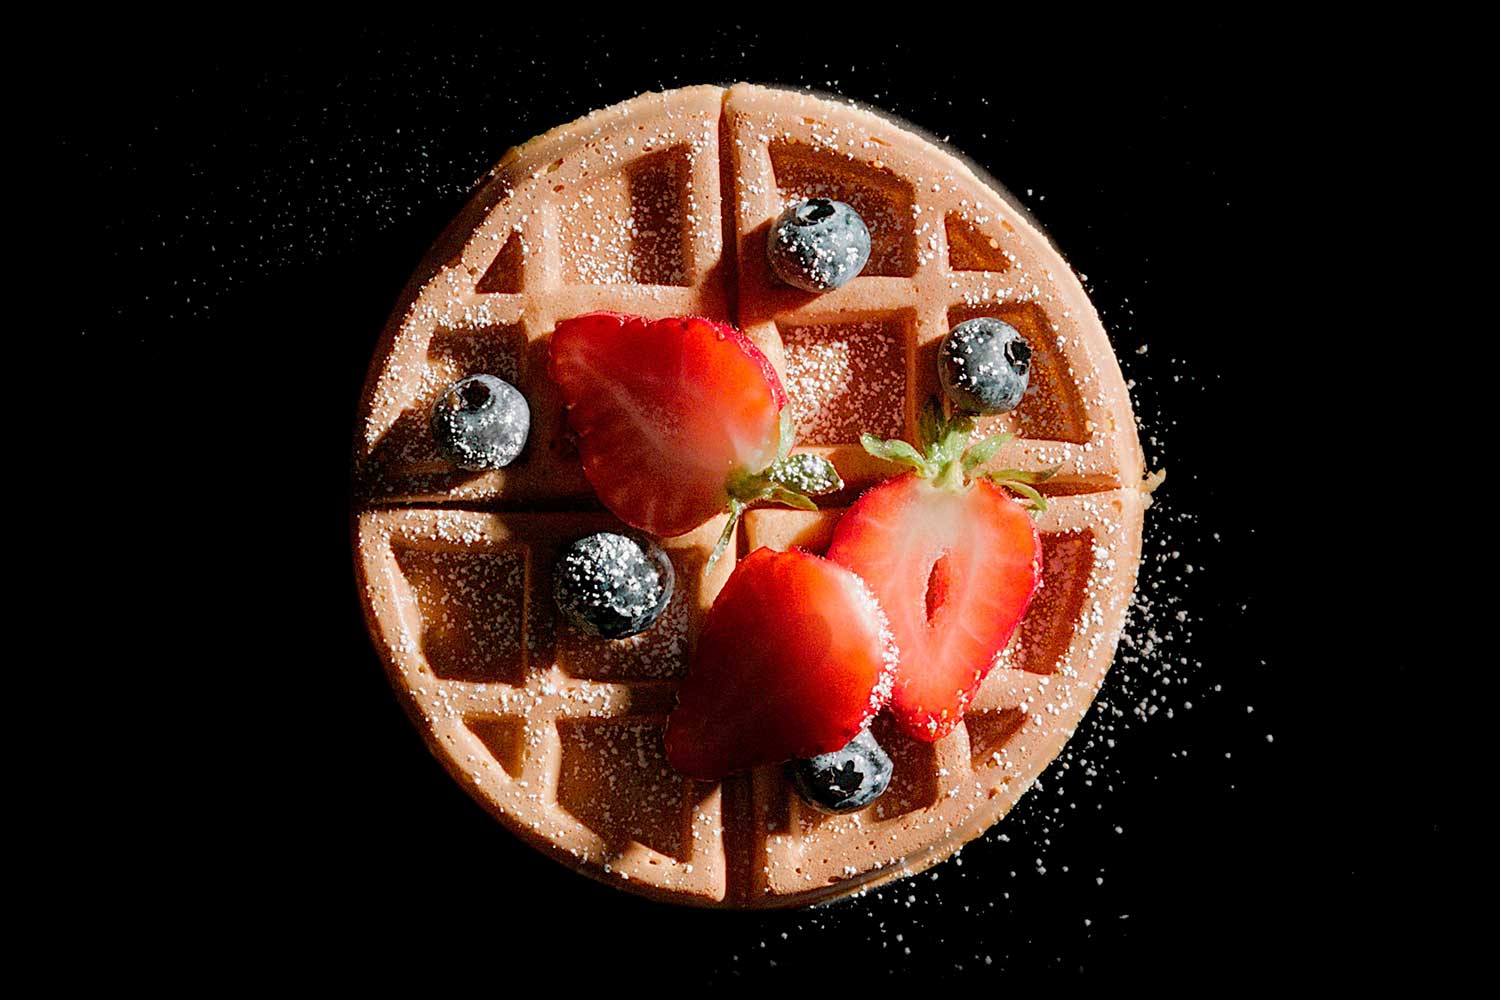 A golden brown waffle topped with strawberries and blueberries on a black background.